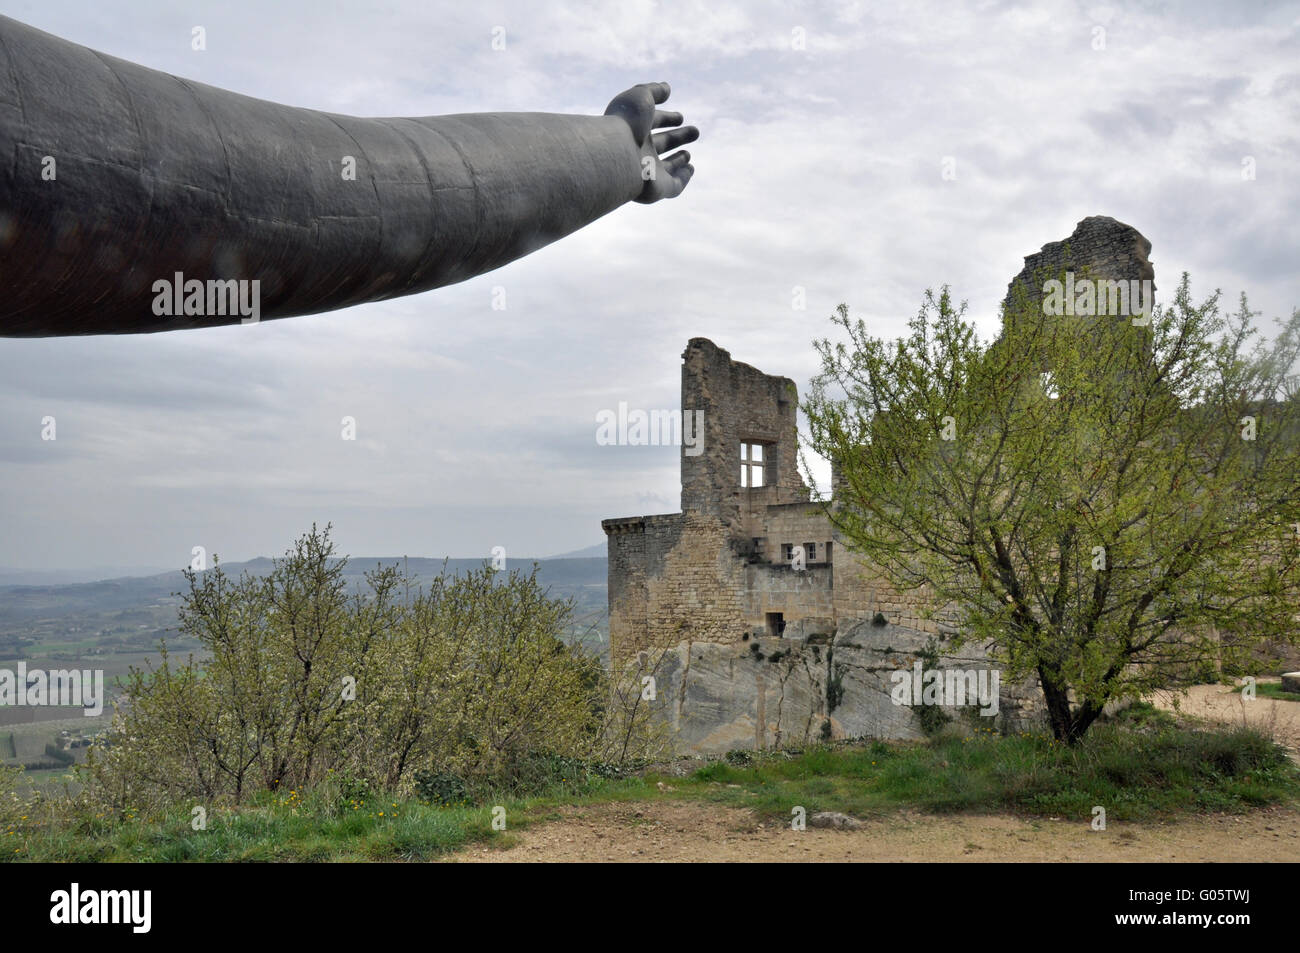 The remains of Marquis de Sade's chateau, La Coste, Provence, France. Stock Photo